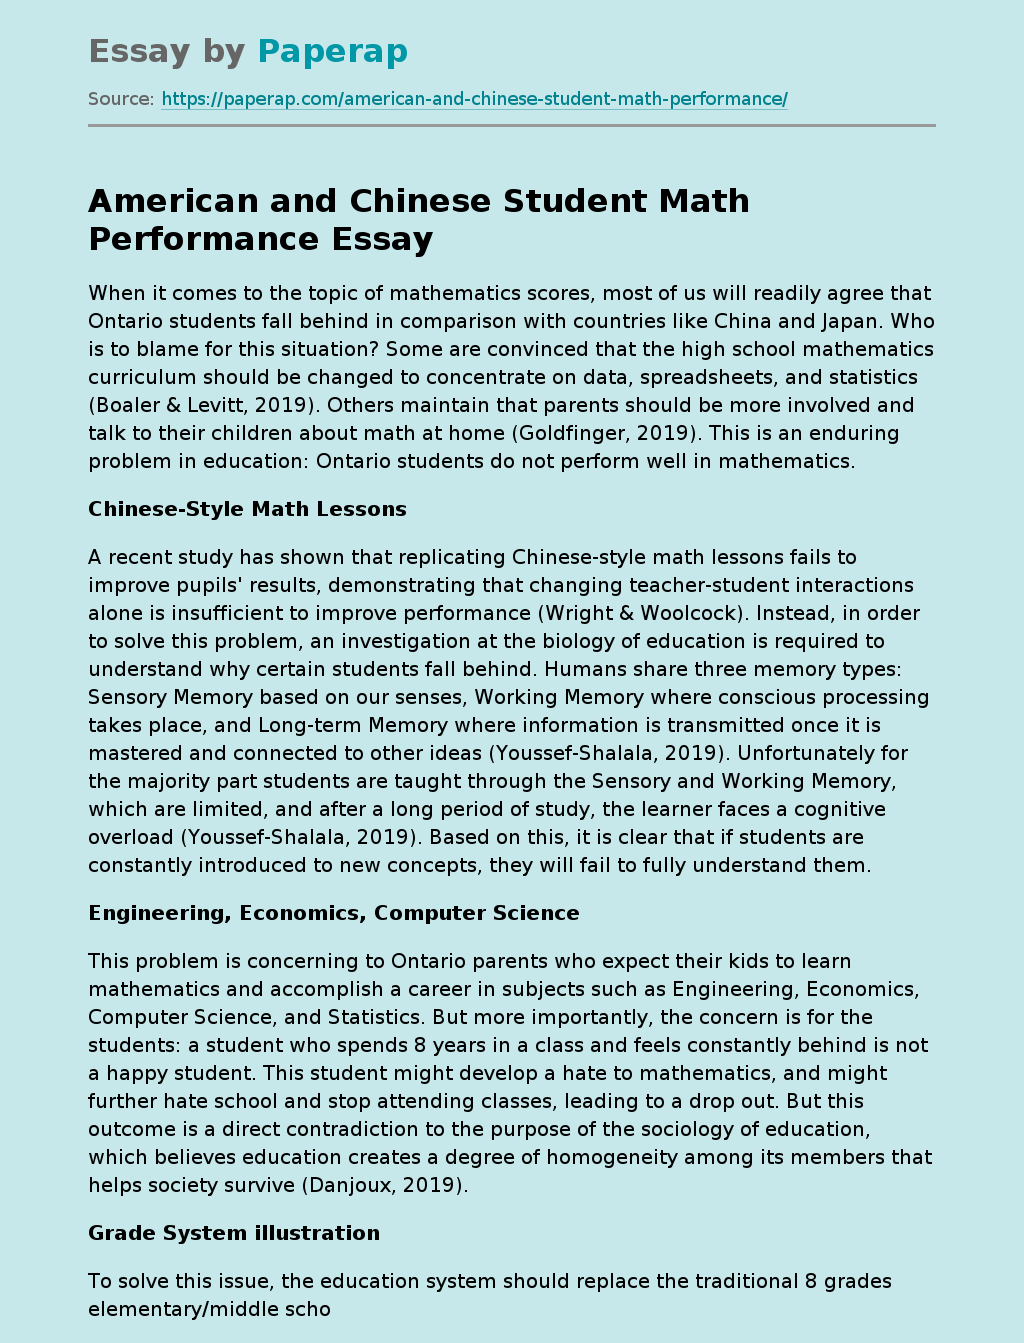 American and Chinese Student Math Performance